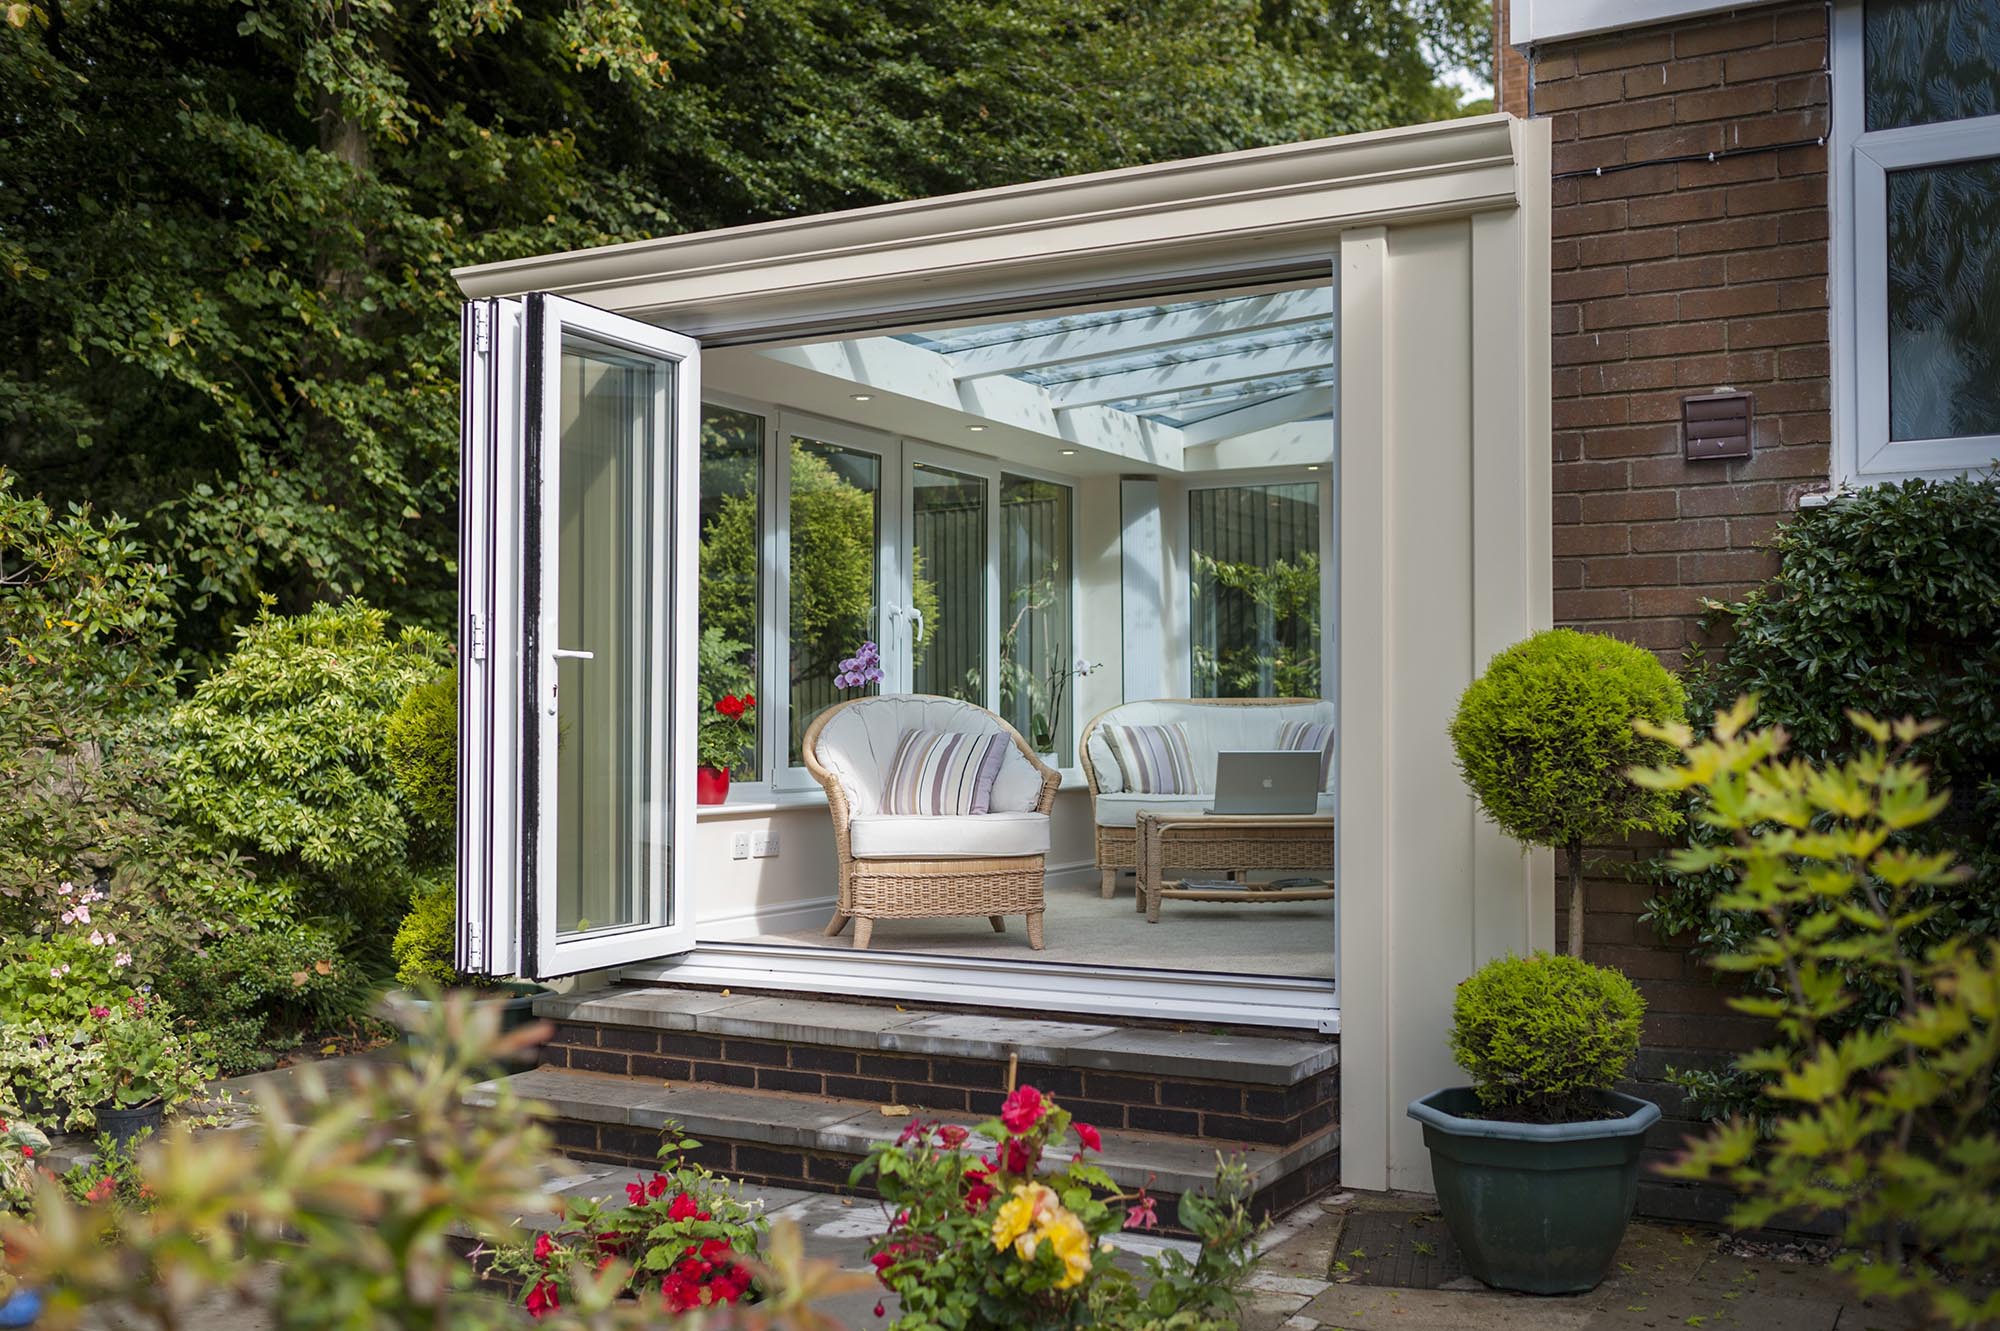 Lean to conservatory style with sliding doors opening to the garden.